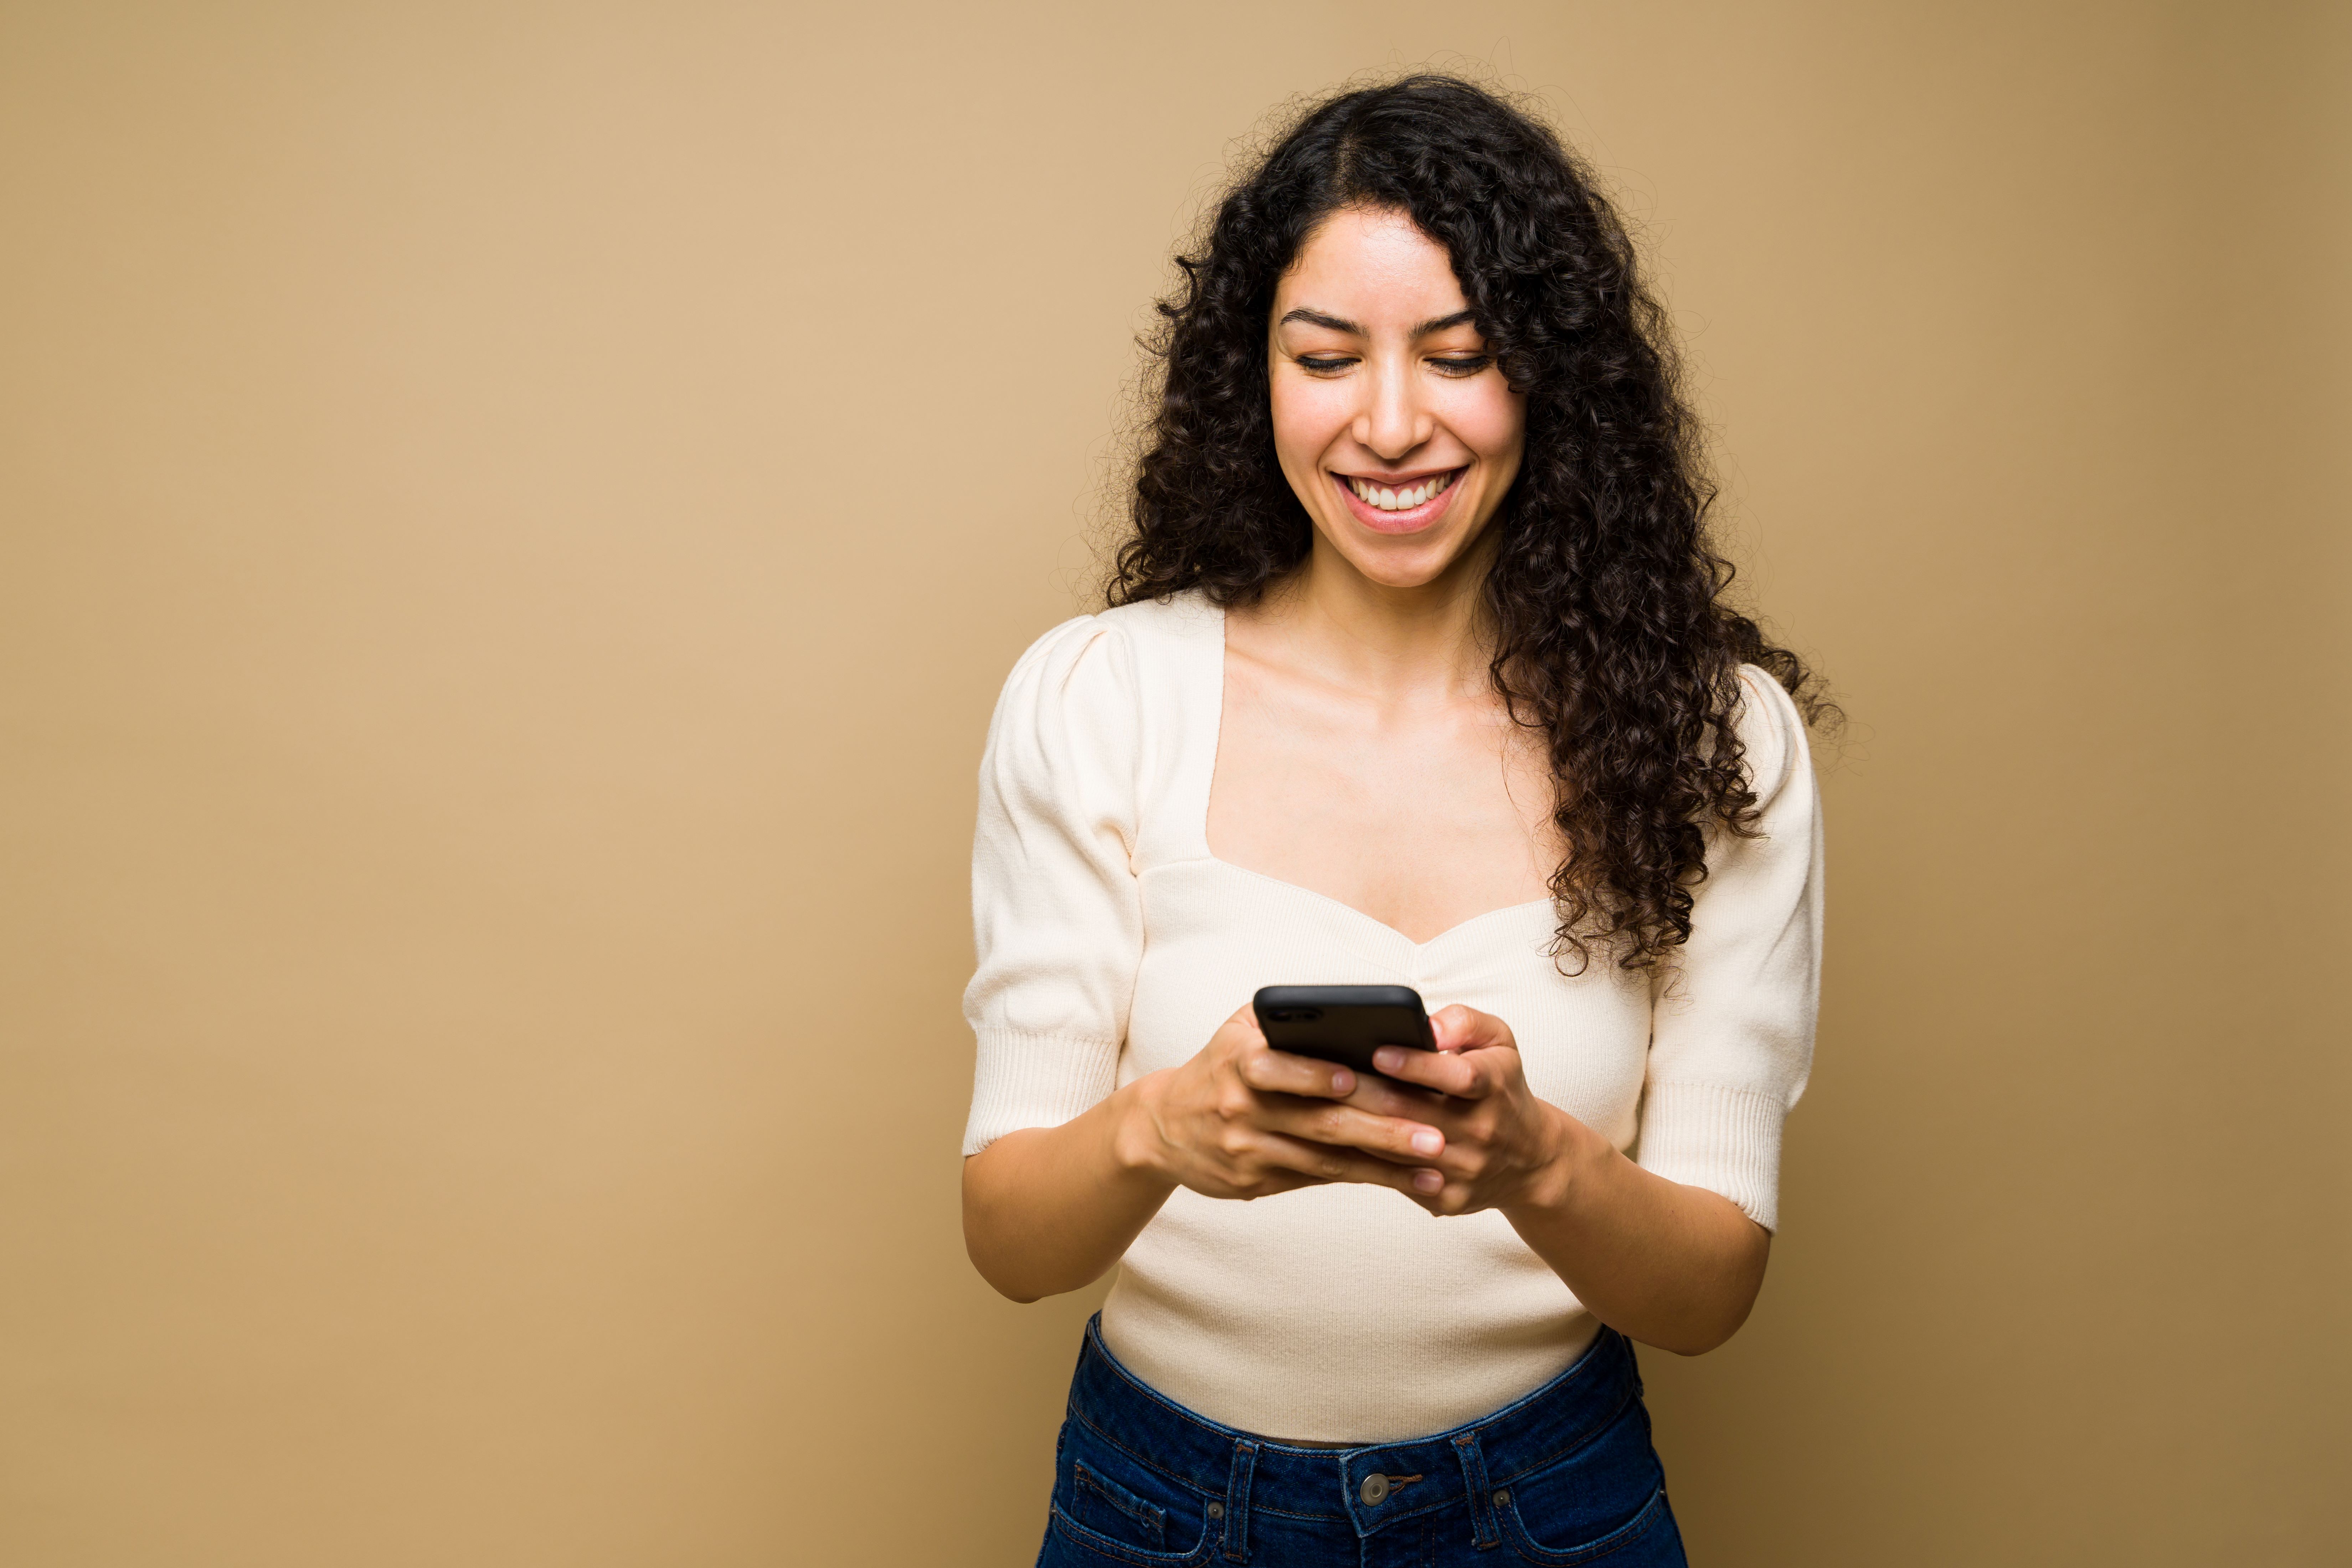 A woman with brown curly hair looks down at her phone while smiling